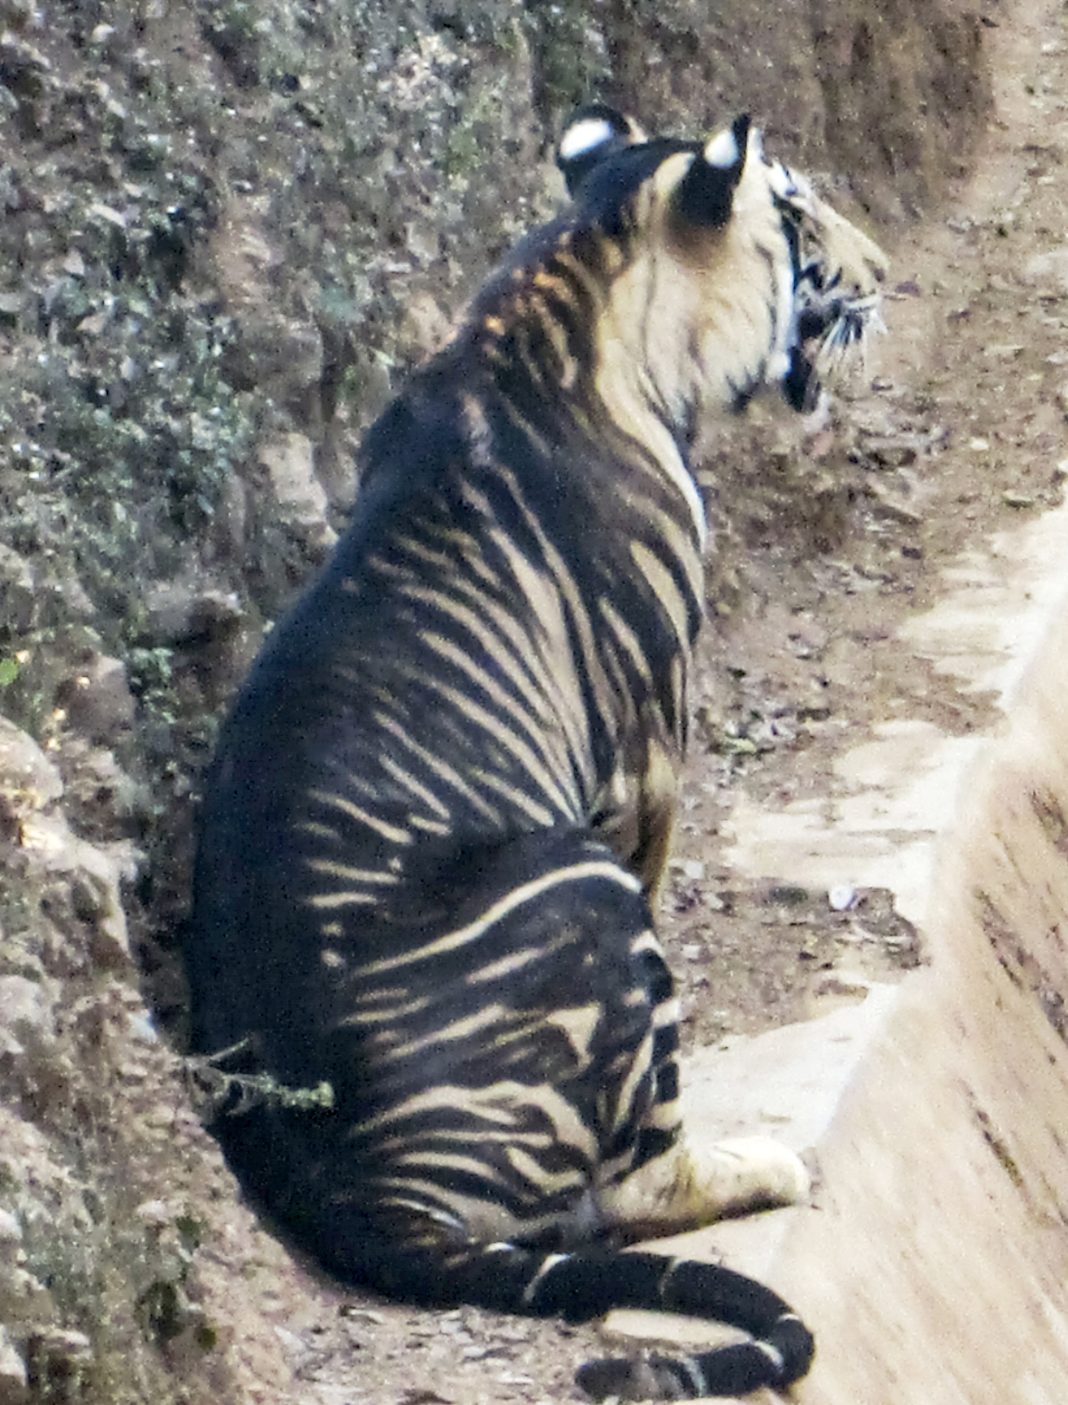 Rare melanistic tiger spotted in India